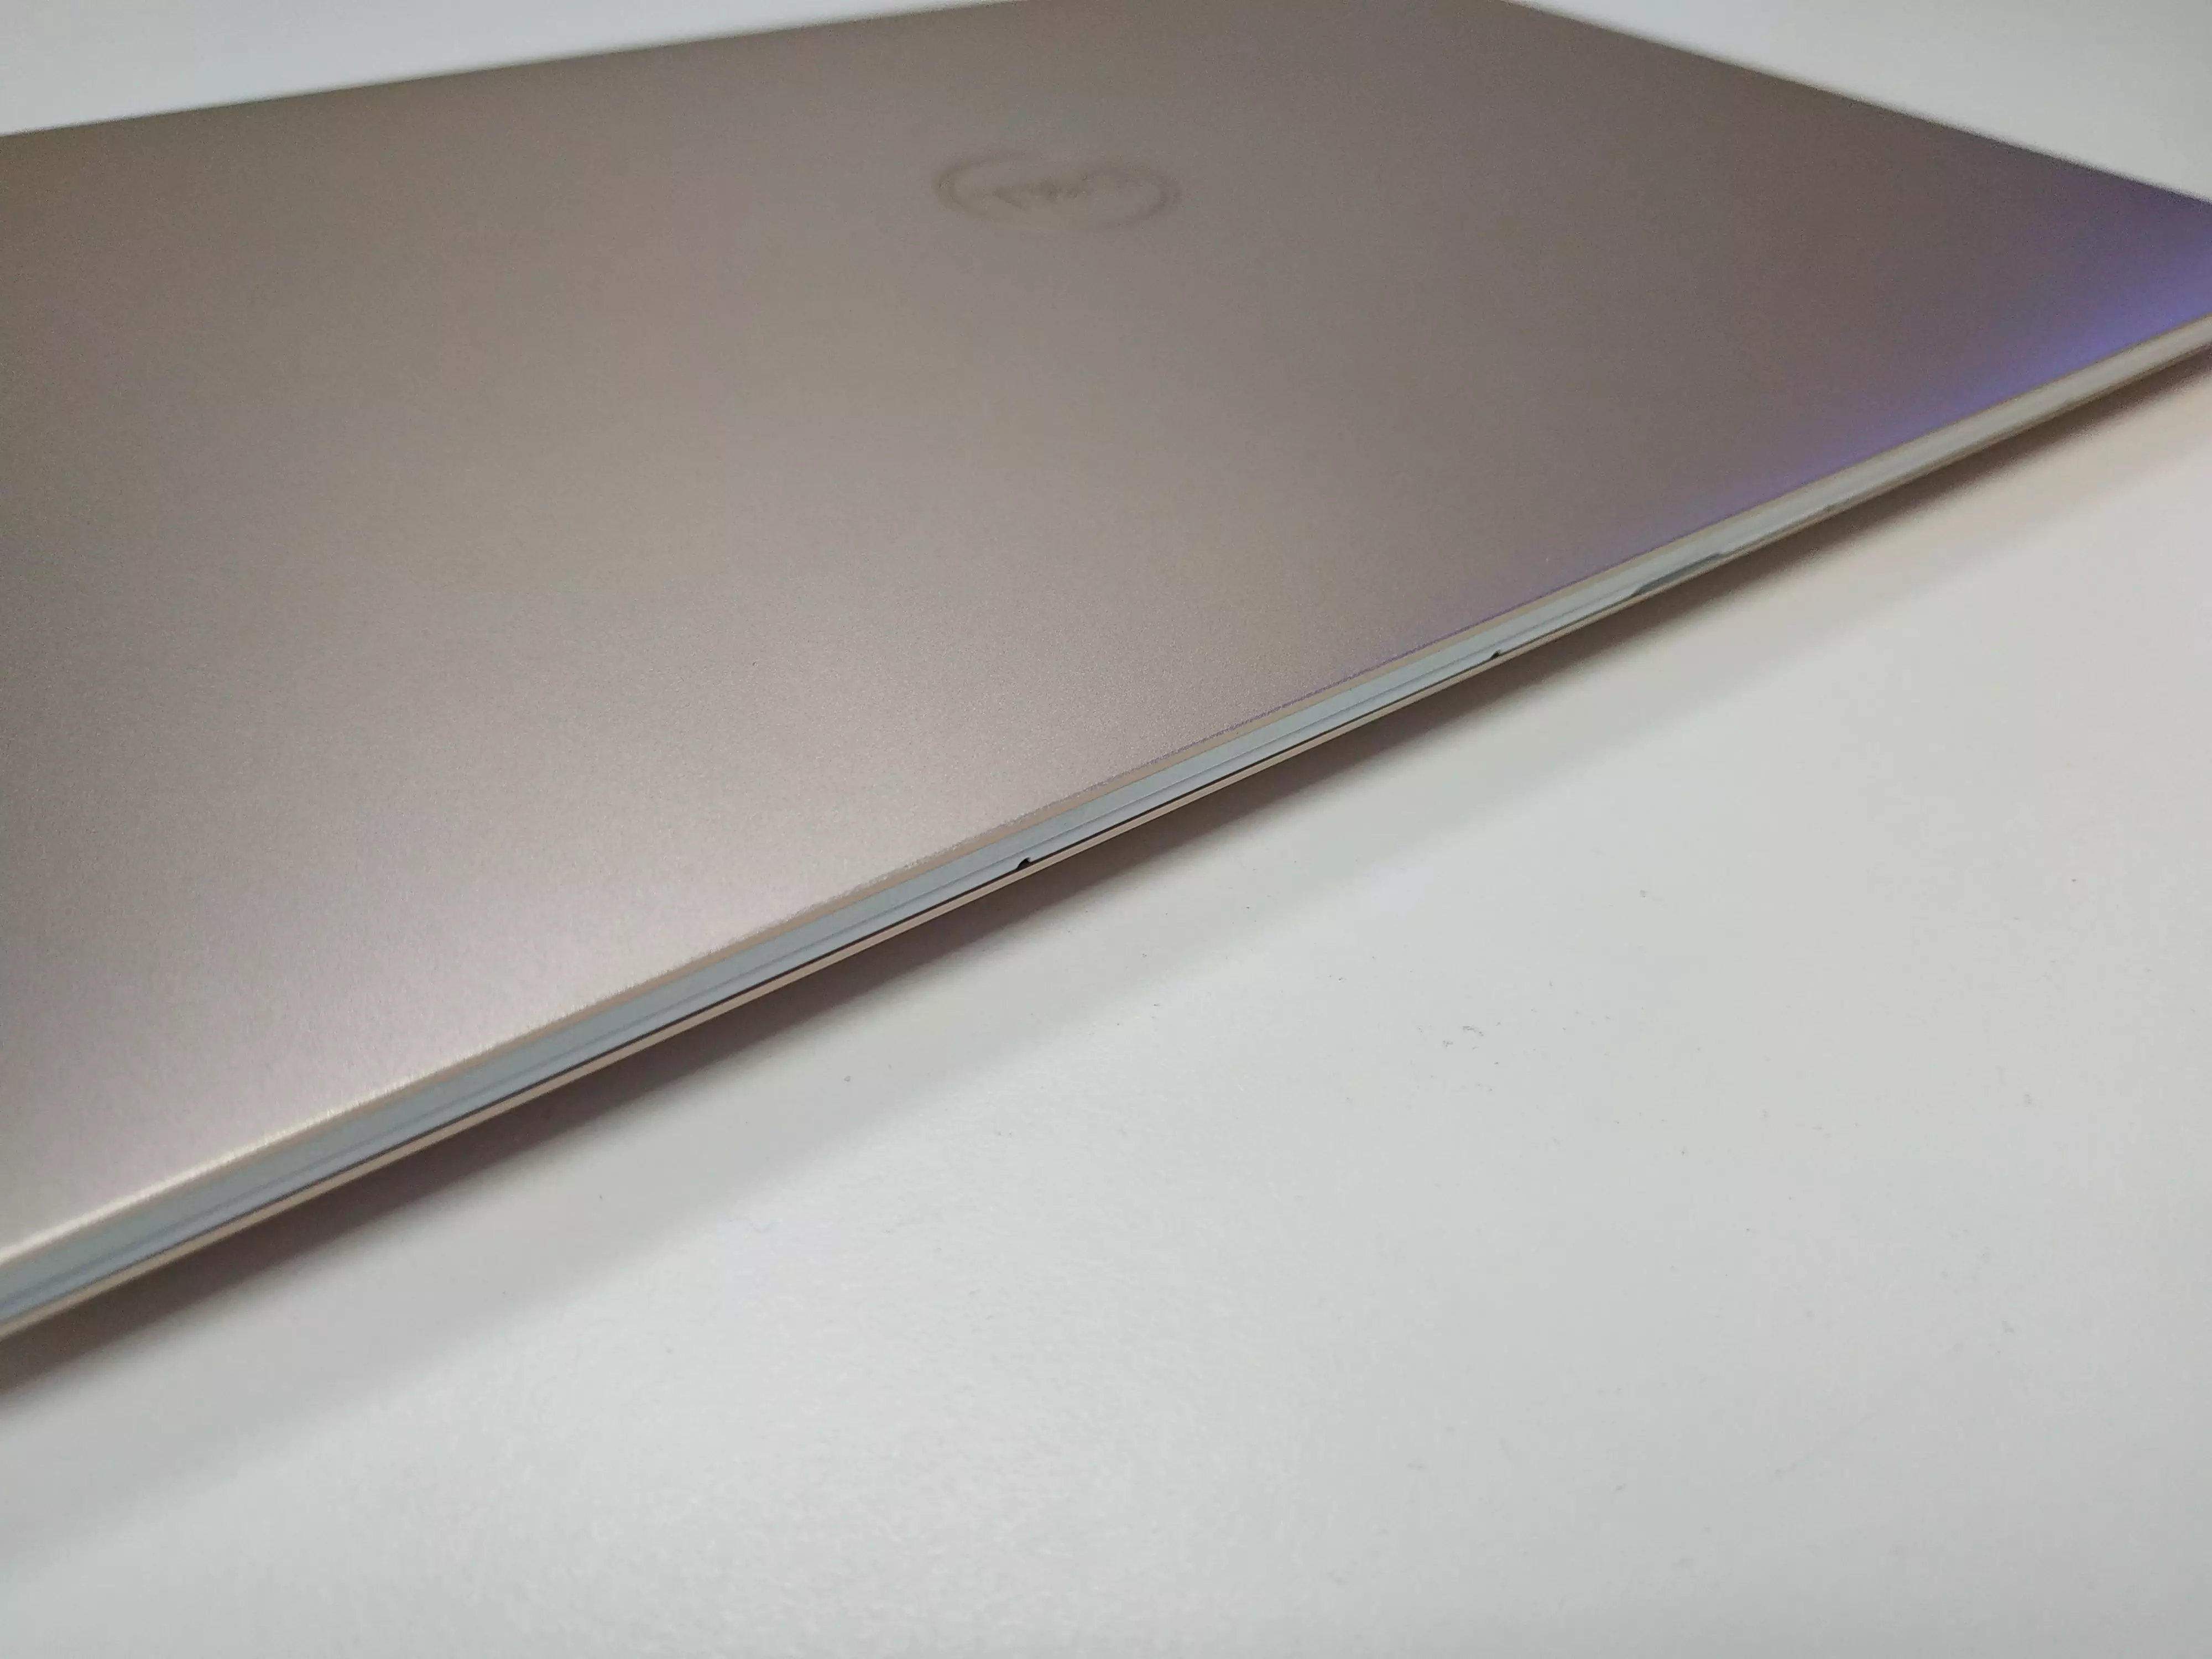 dell xps 13 review 5